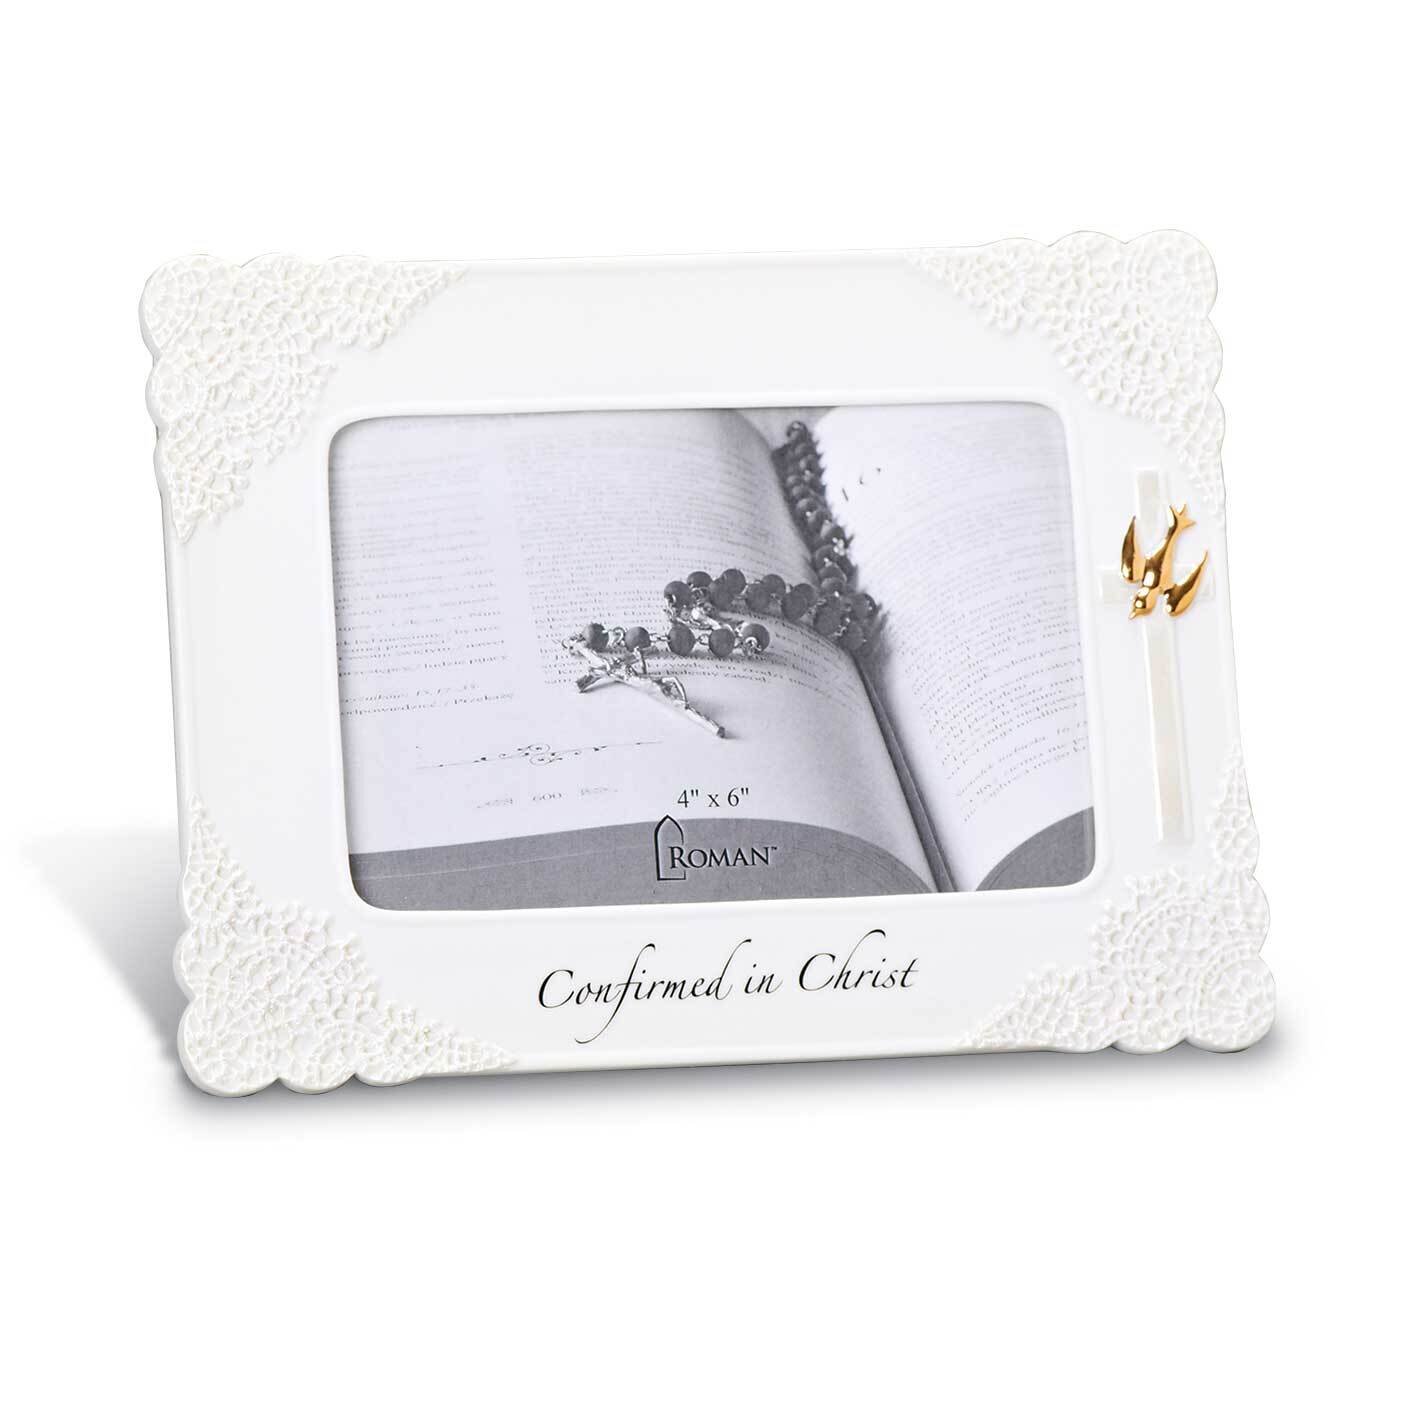 Porcelain Lace Confirmed in Christ 4 x 6 Inch Picture Frame GM23621